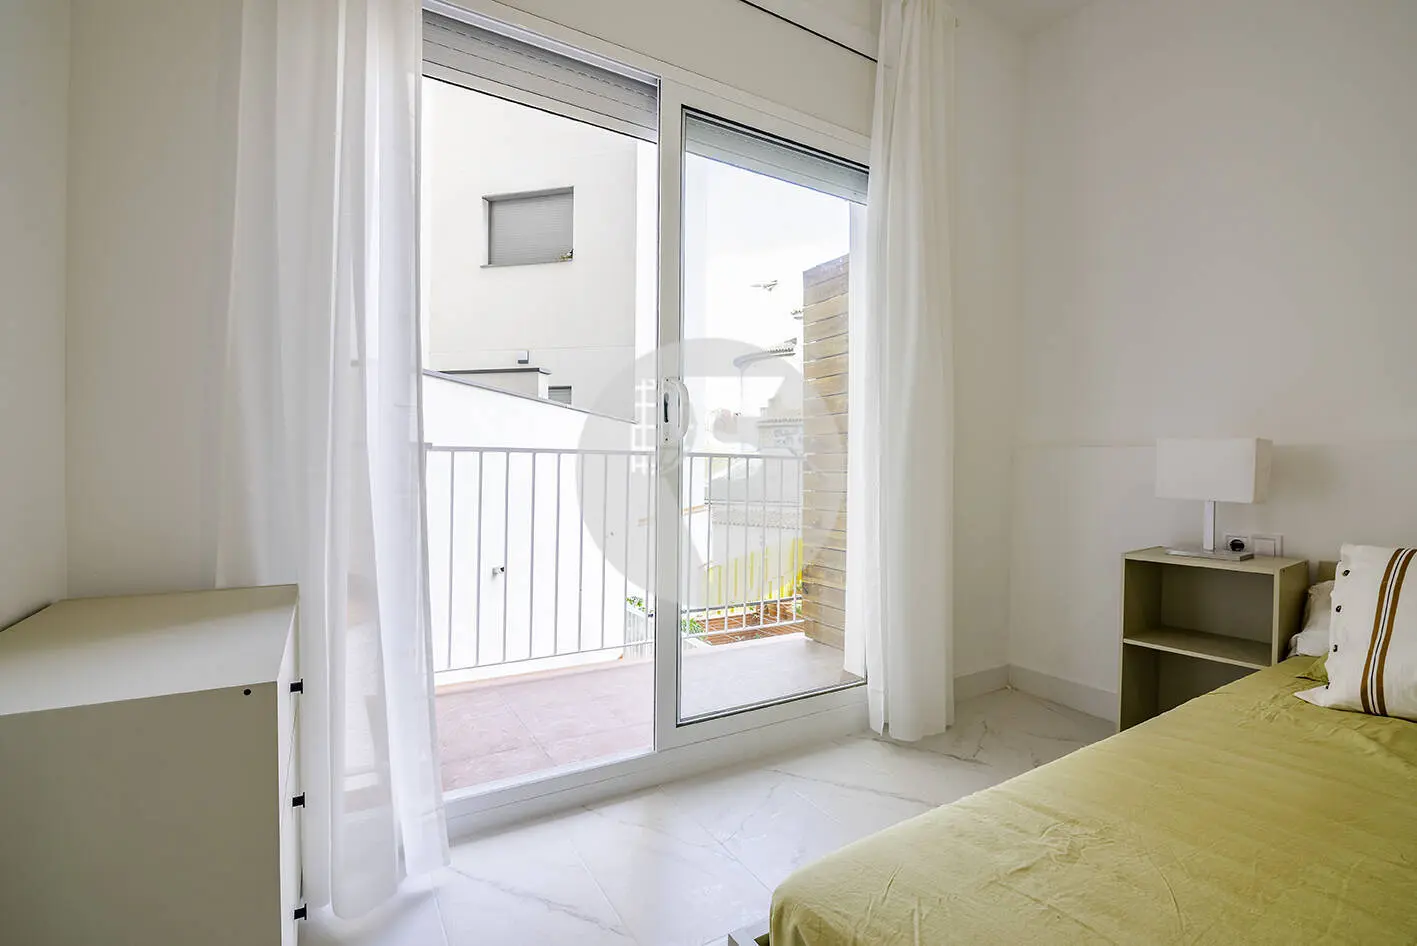 Brand new completely renovated apartment on Aragó street in the heart of El Clot in Barcelona. 36